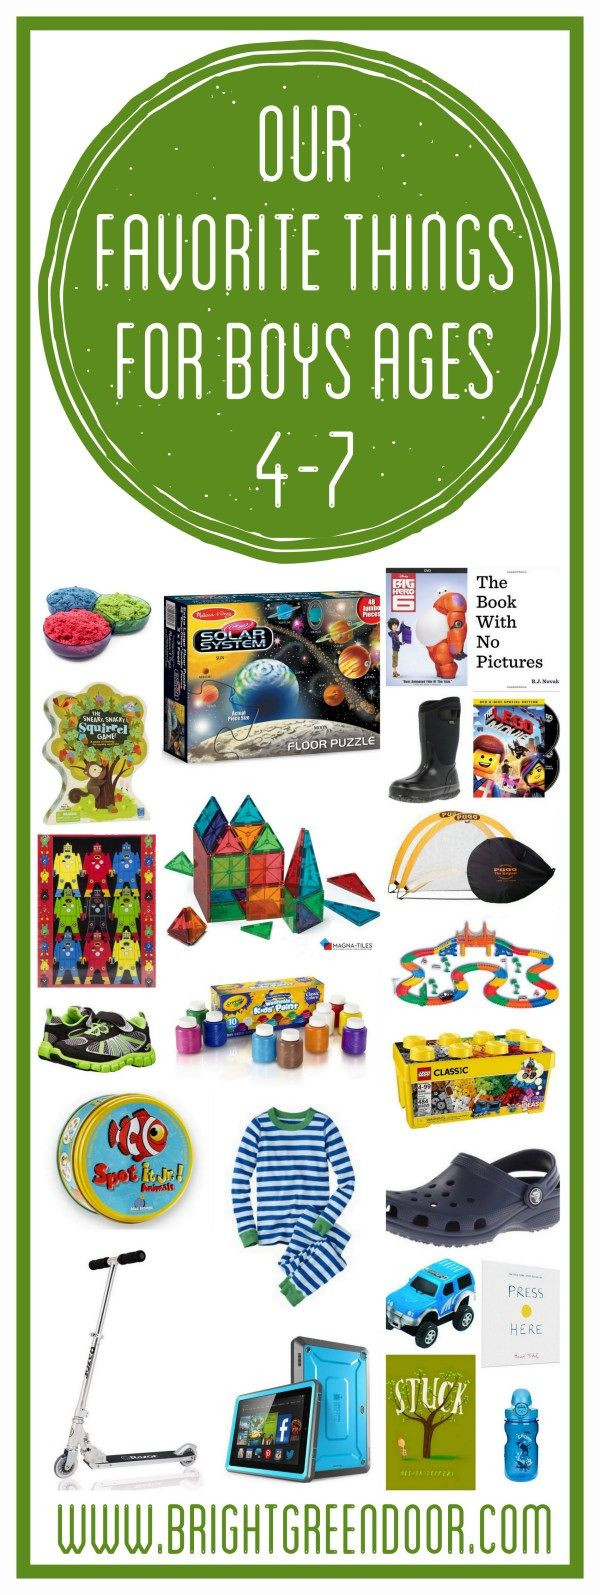 Gift Ideas For Boys Age 7
 Our Favorite Things for Boys Ages 4 7